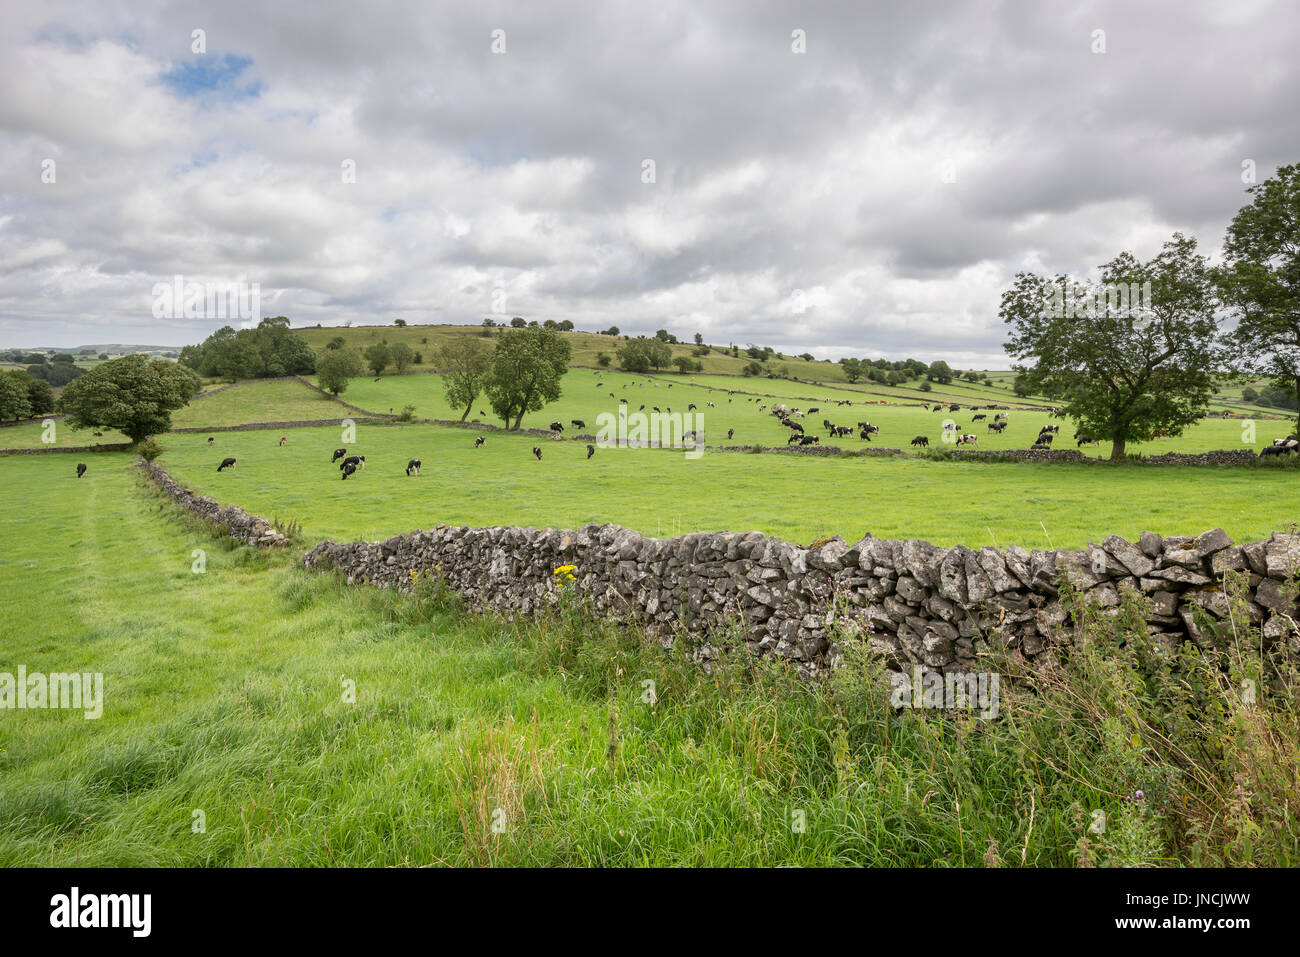 Dairy cattle in lush green fields in the Peak District countryside, Derbyshire, England. Stock Photo